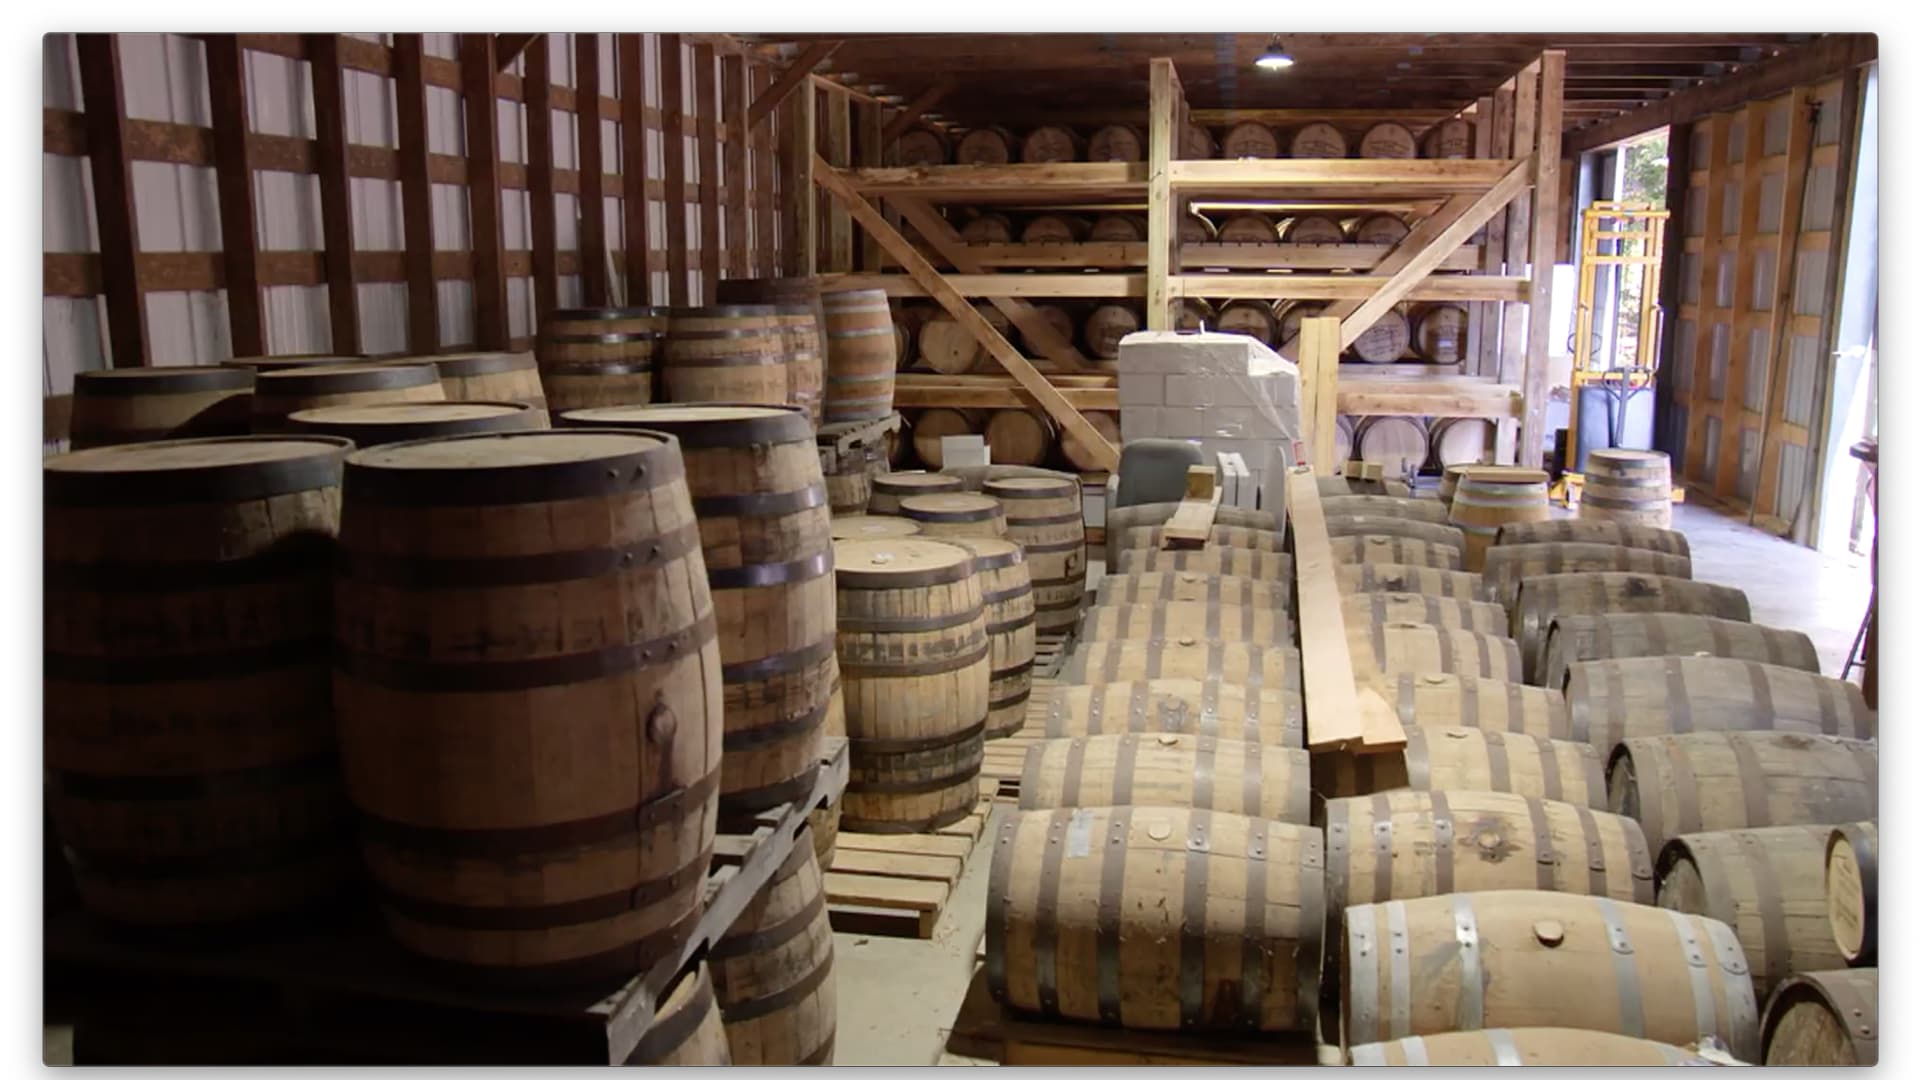 Barrels of spirits age at the Tobacco Barn Distillery in Hollywood, Maryland.